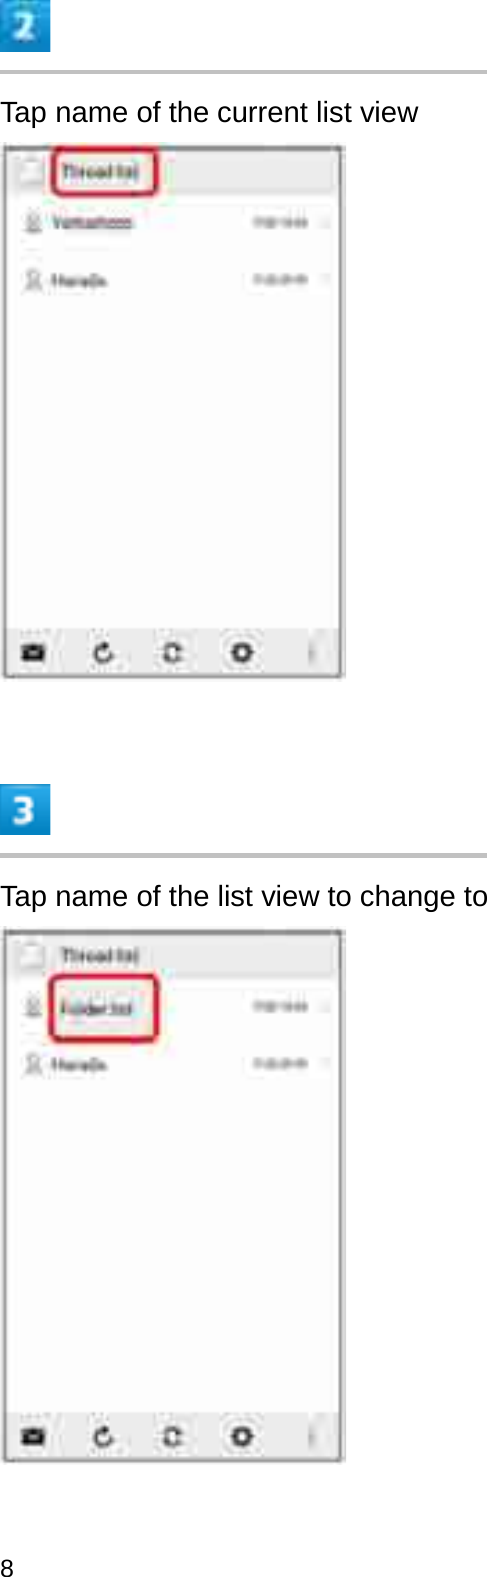 Tap name of the current list viewTap name of the list view to change to8